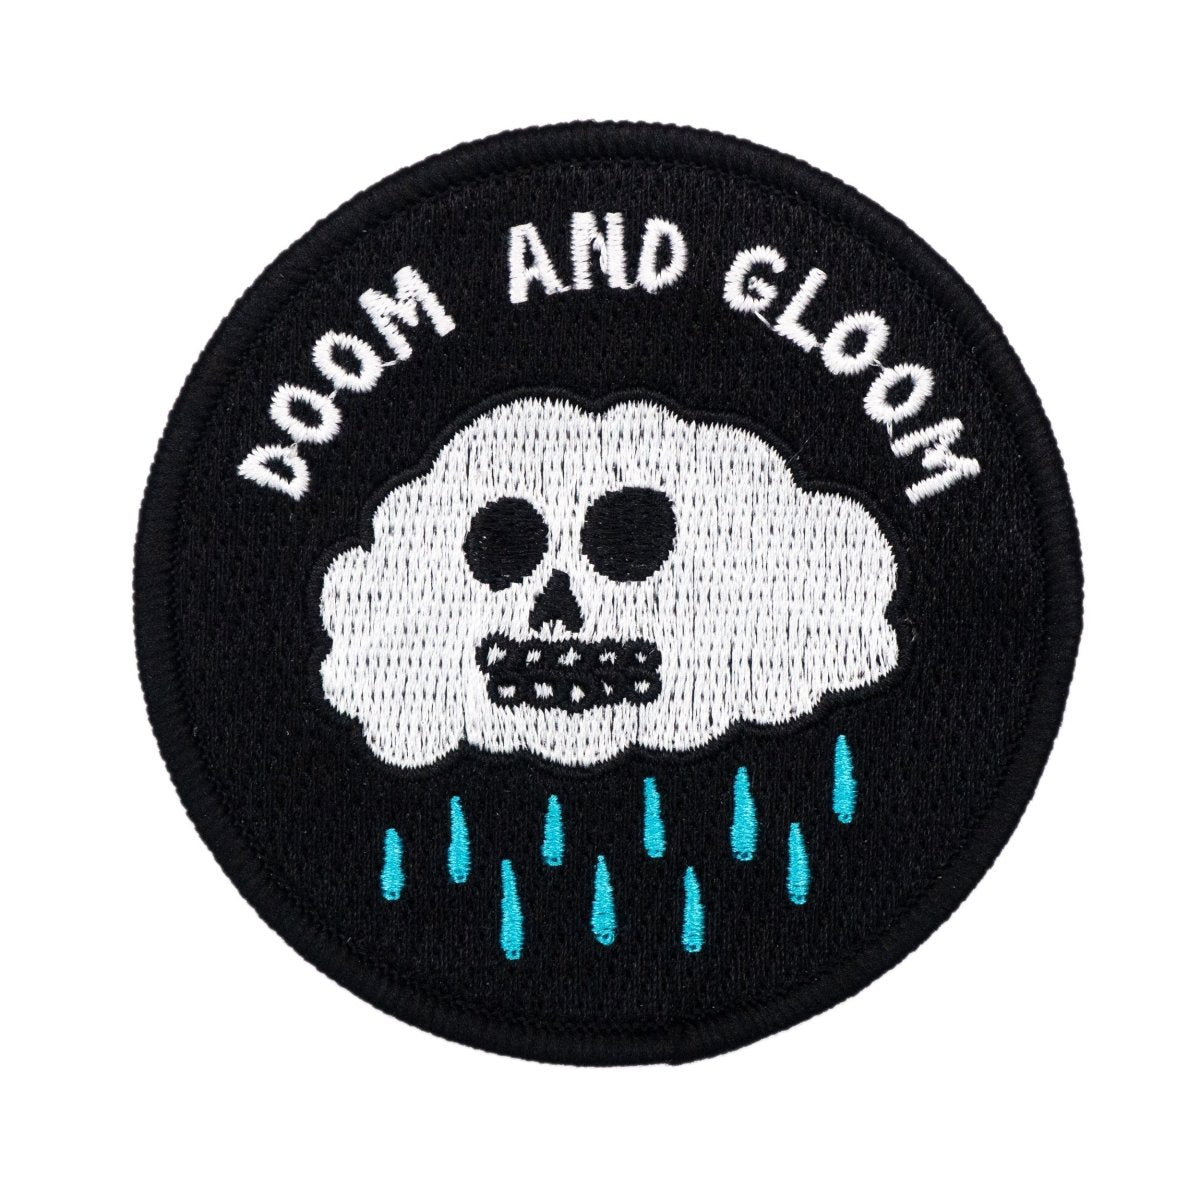 Doom and gloom patch - Patch - Pretty Bad Co.